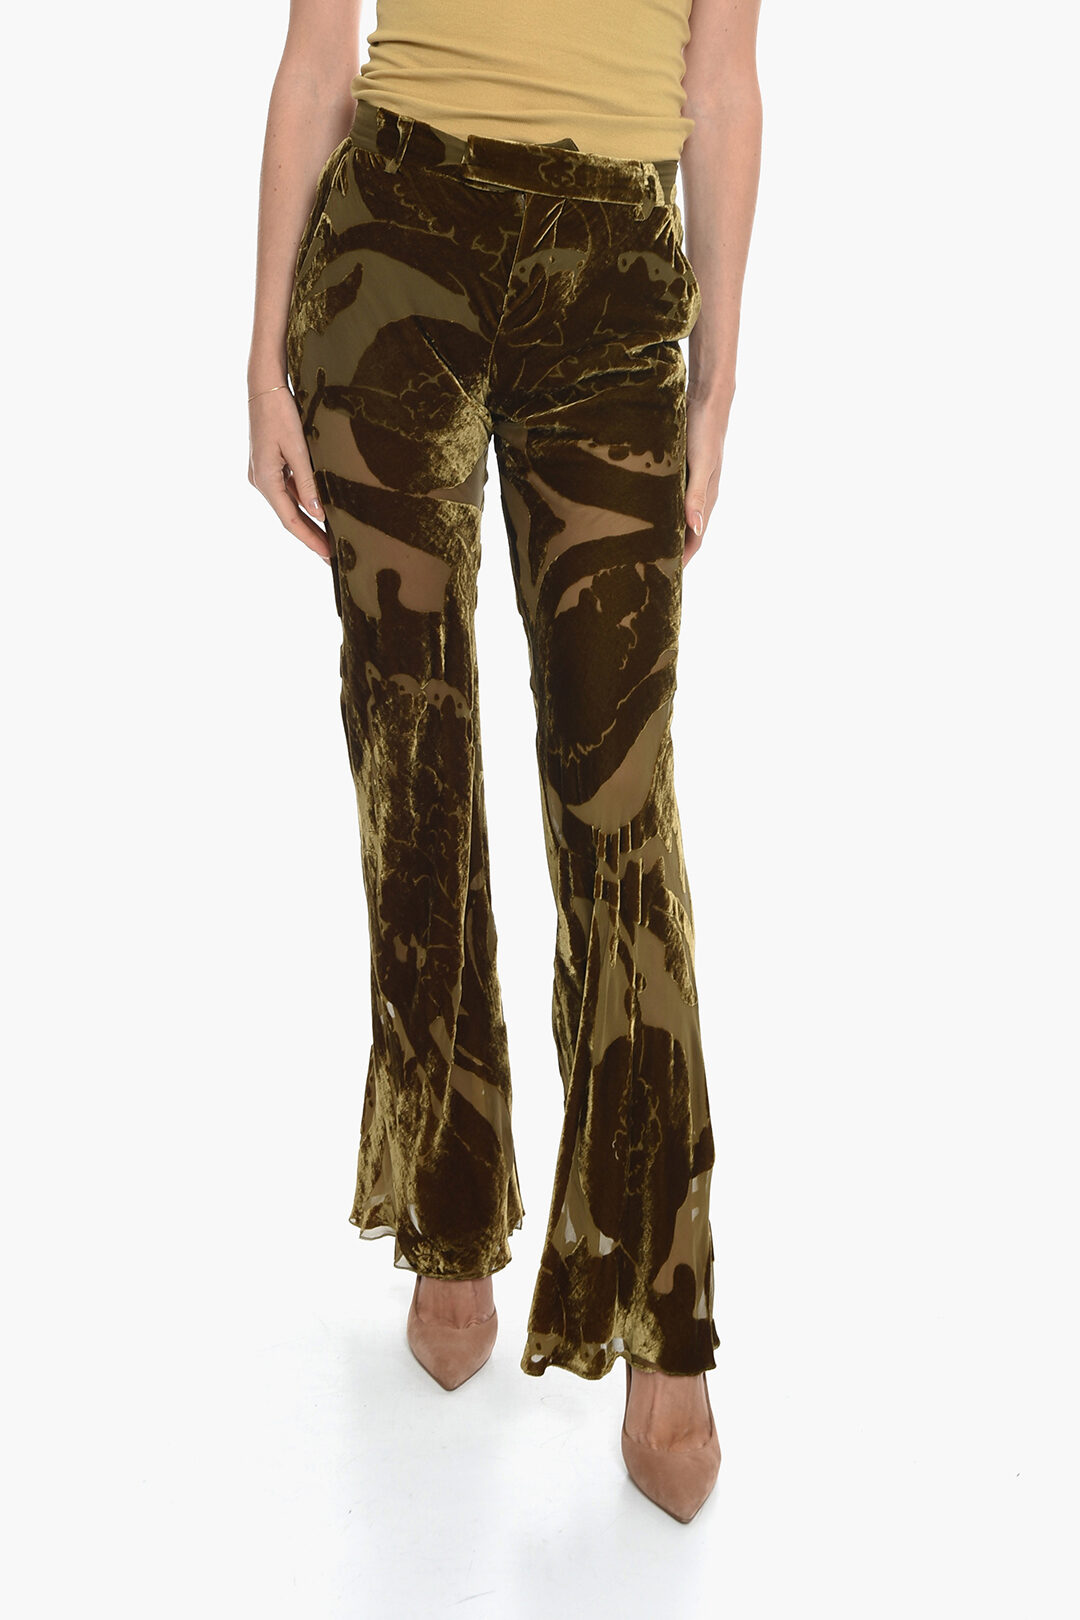 Etro Velvet See Through Pants with Floral Motif women - Glamood Outlet